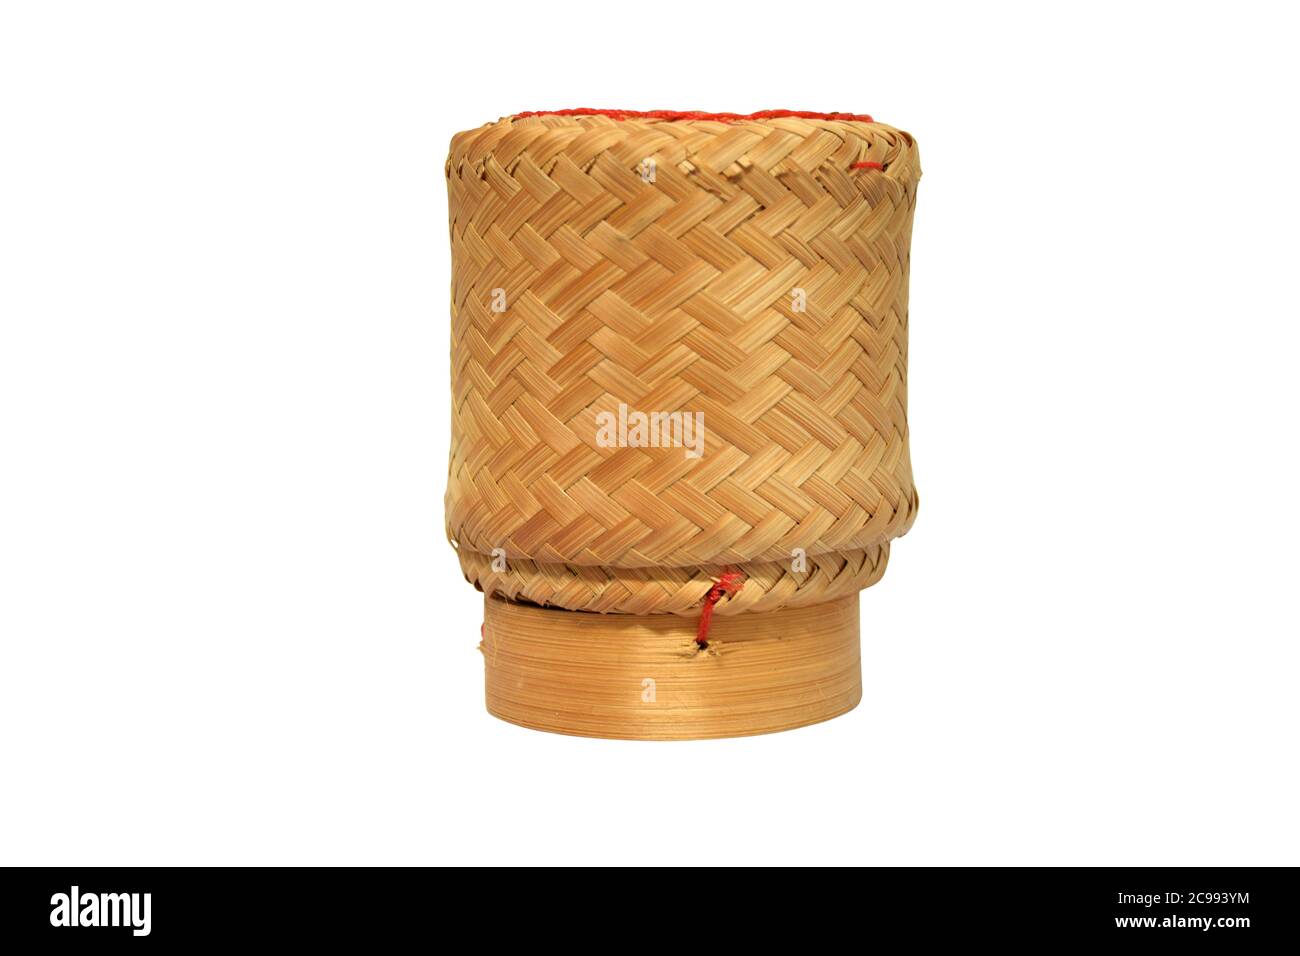 A Lao rice basket or bamboo basket or houat and Thailand name is Kratip for Glutinous rice or sticky rice on white background with Clipping path. Stock Photo